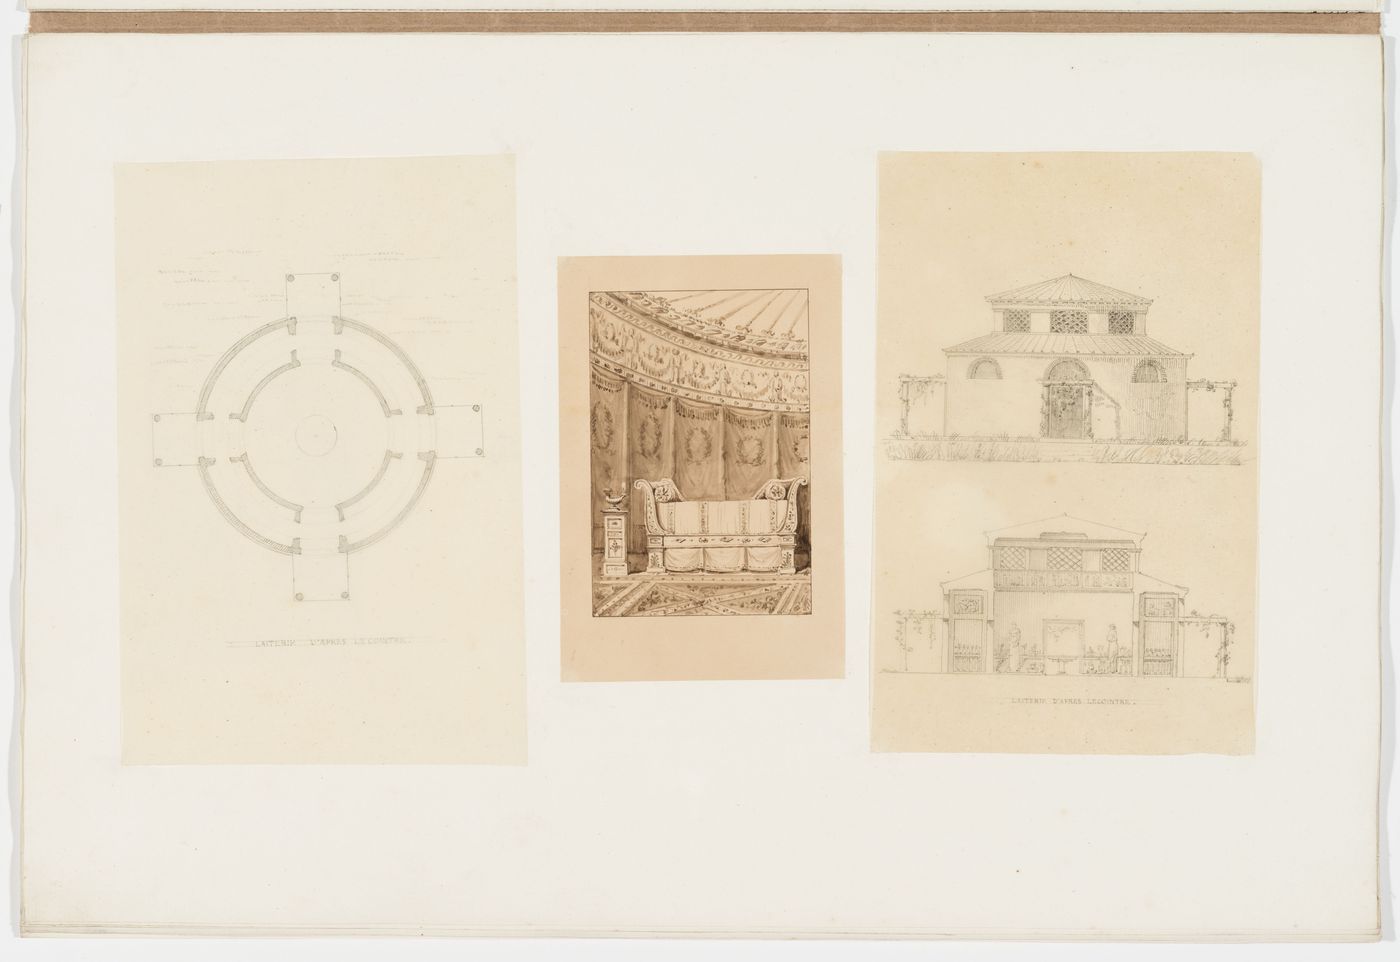 Plan, interior view, elevation and section for a dairy